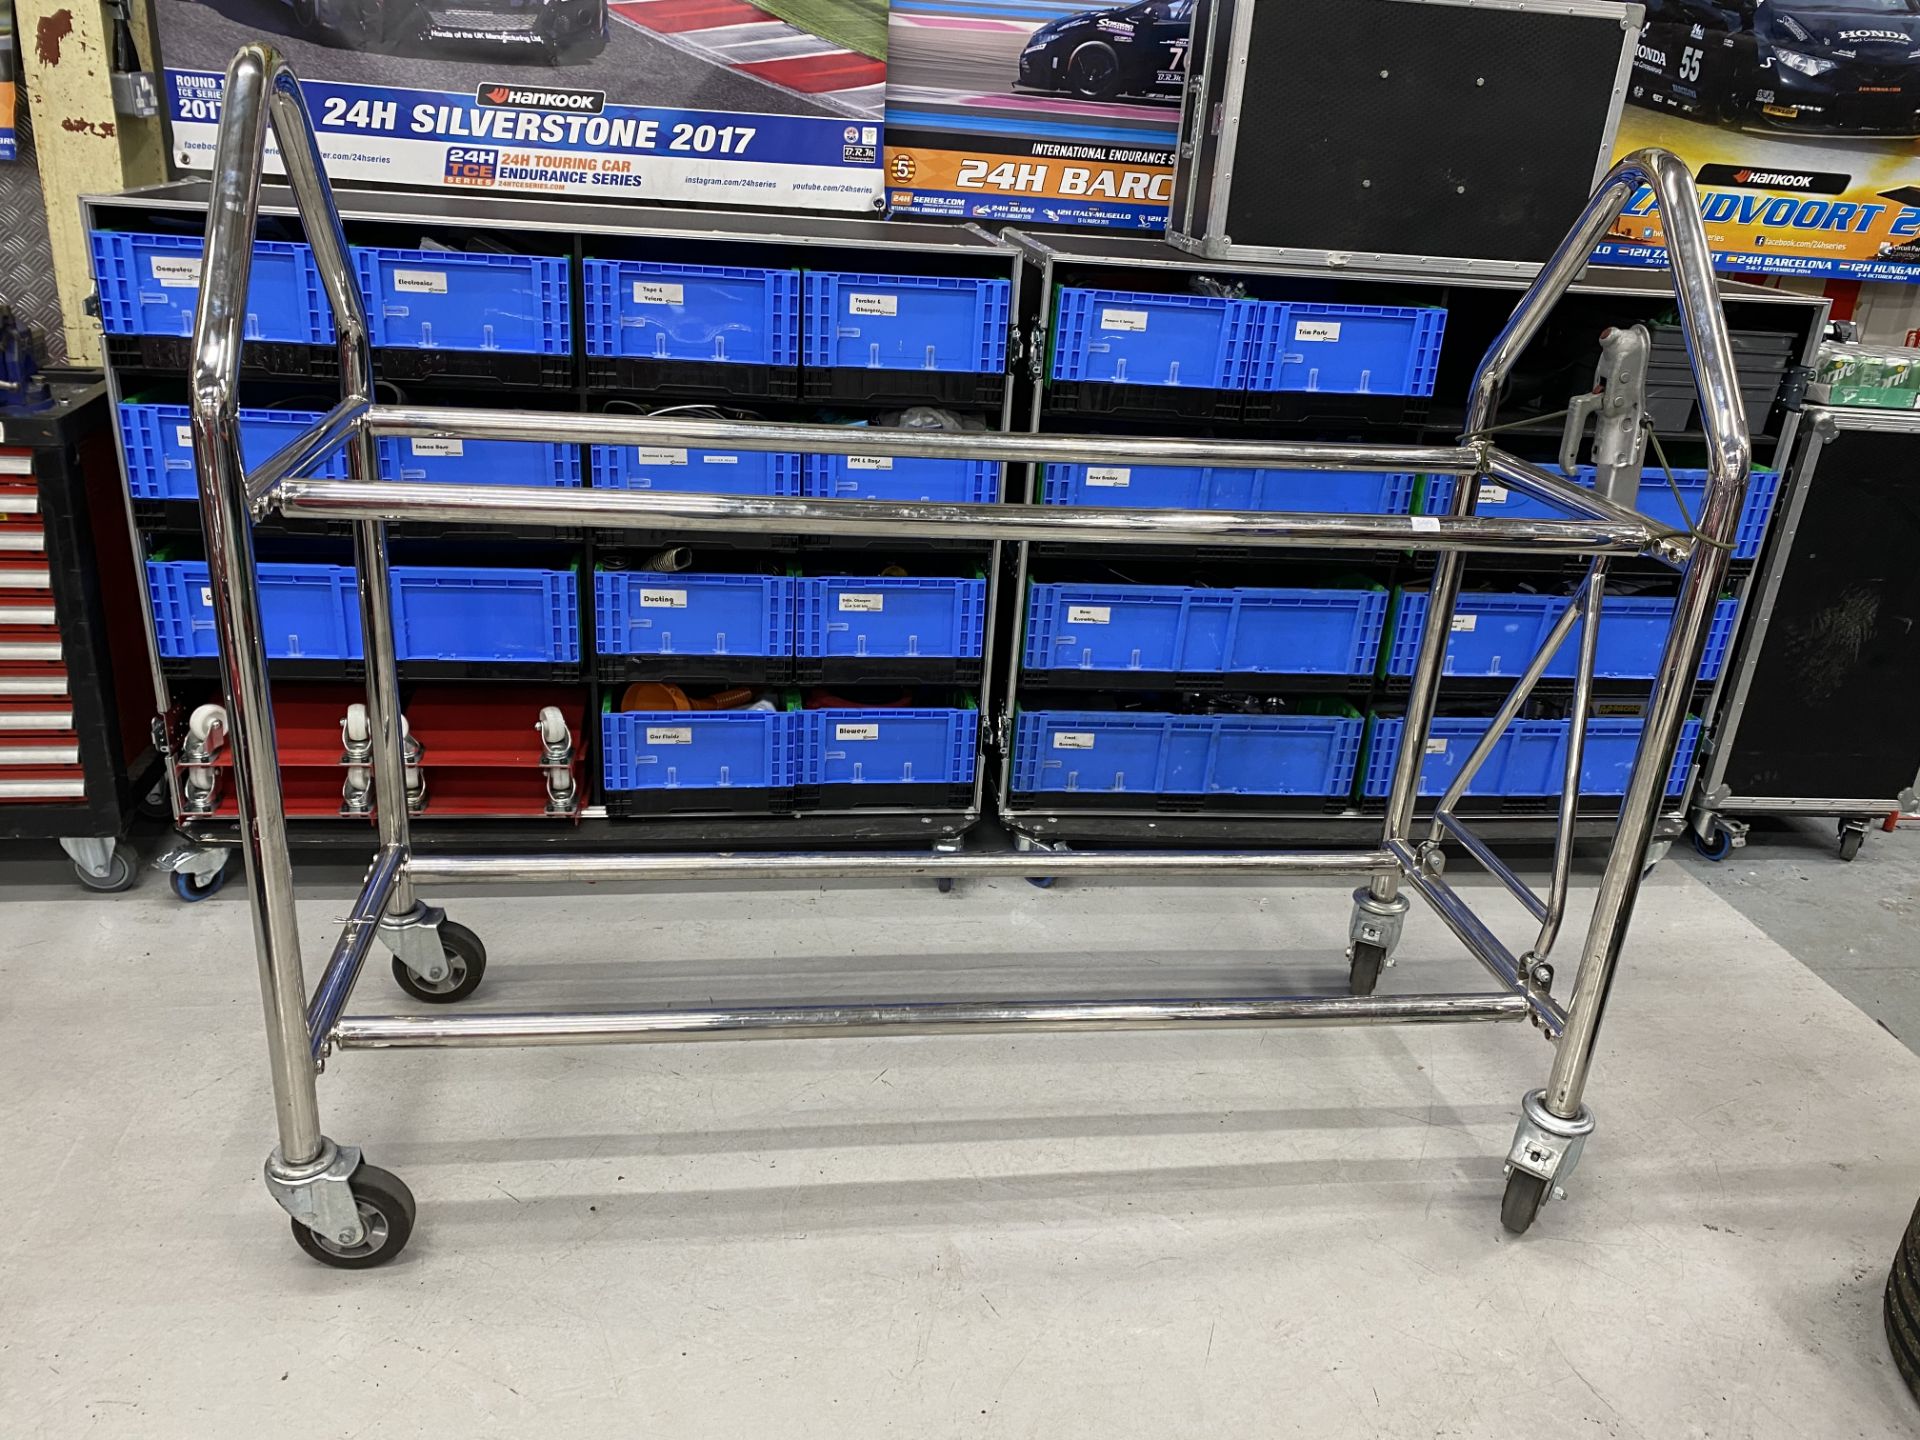 Race day chrome plated mobile wheel storage rack, suitable for storing 14 x 18" x 10" wheels, with